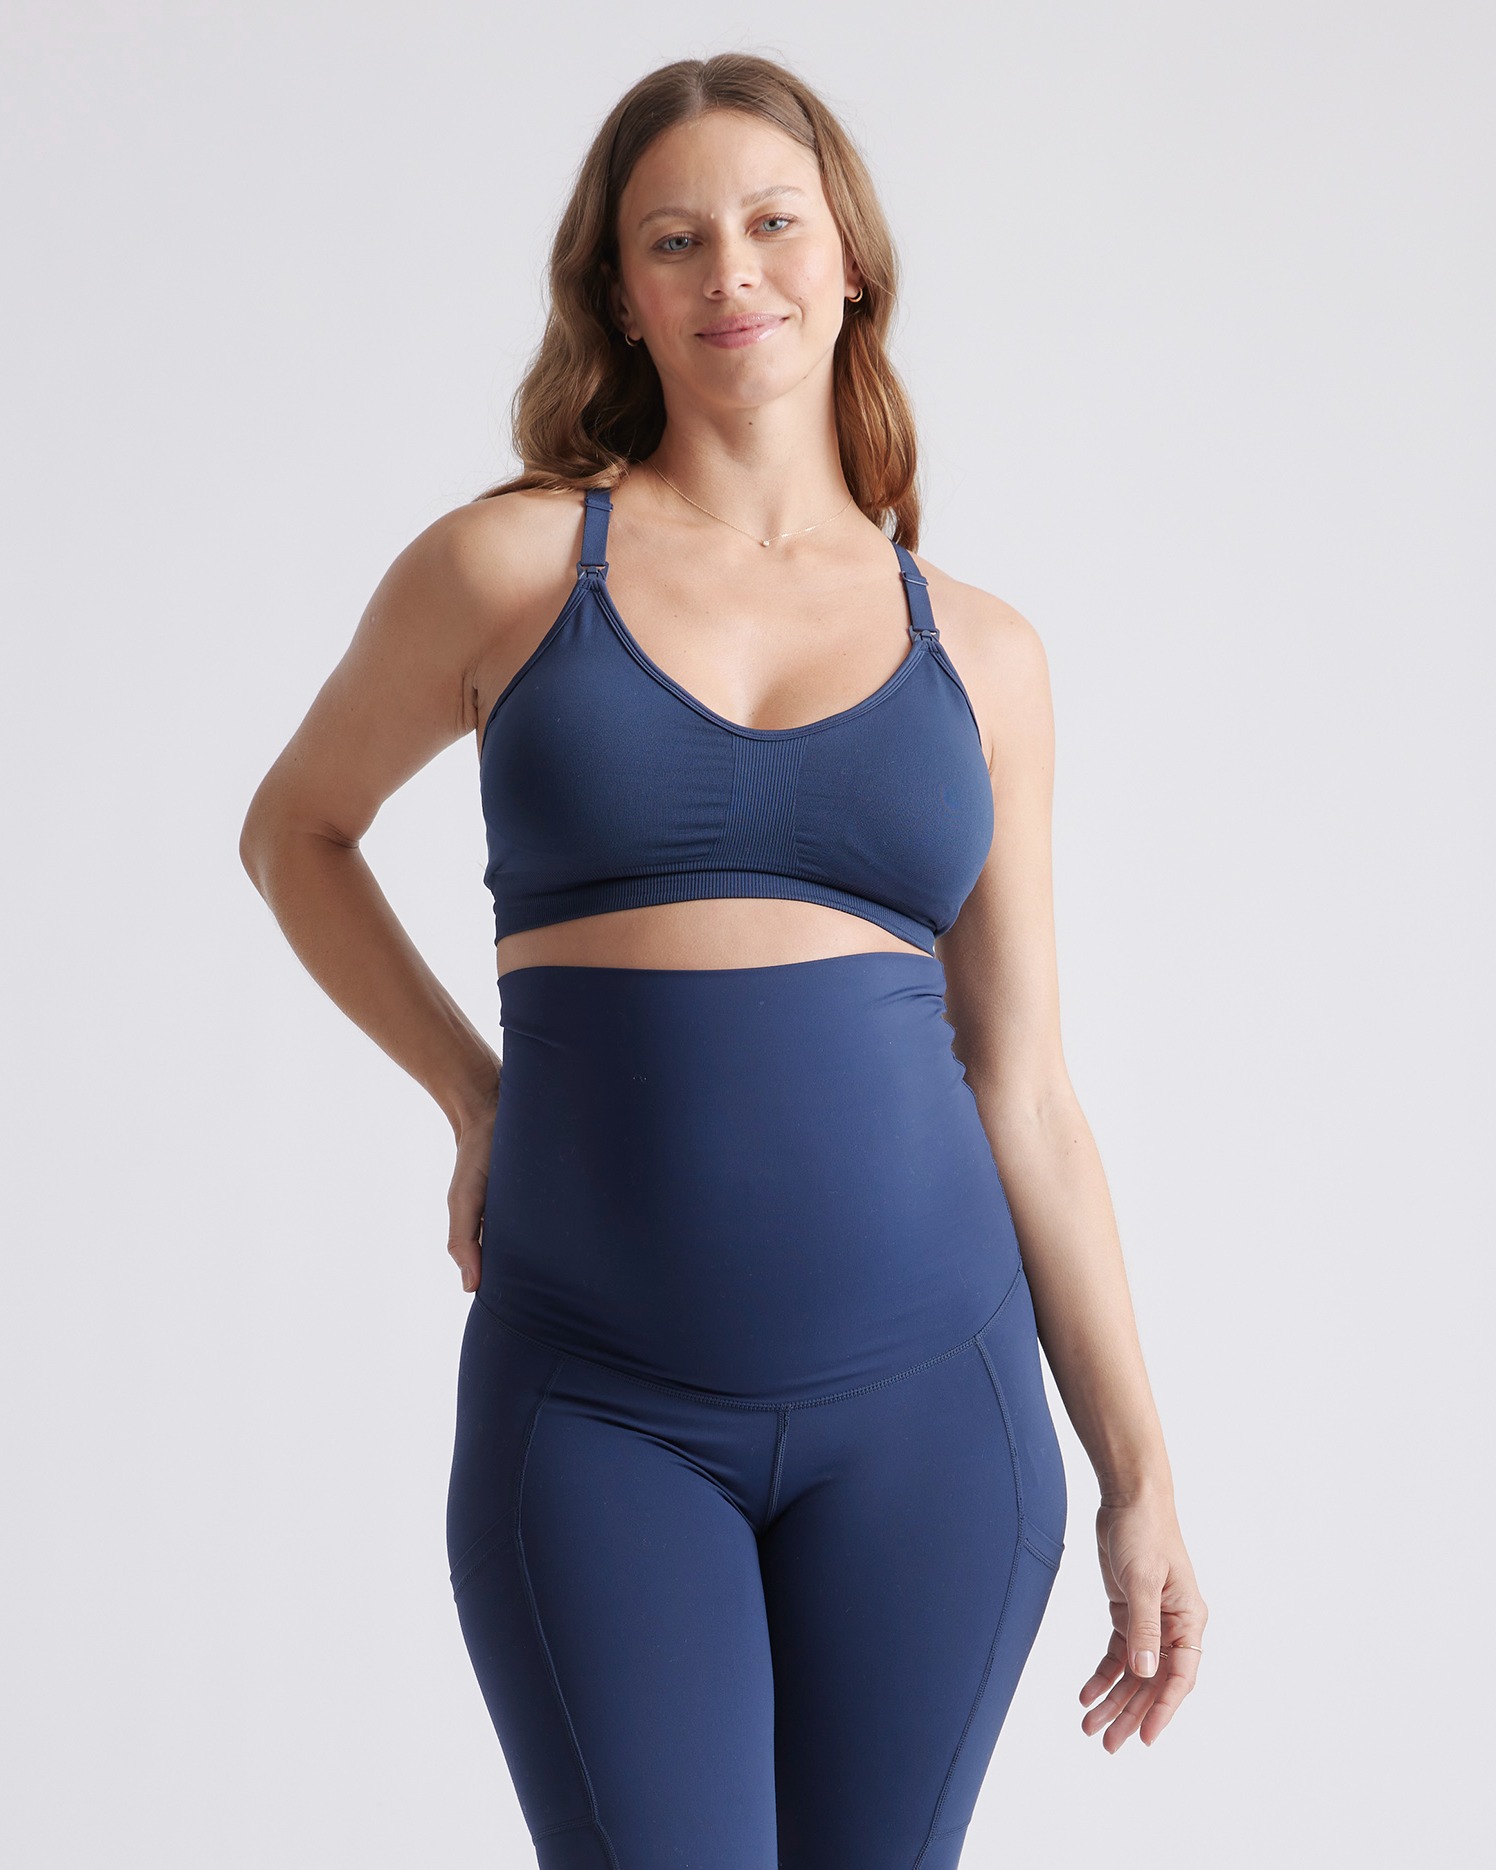 Kindred Bravely Sublime Support Low Impact Nursing & Maternity Sports Bra -  Black, Small